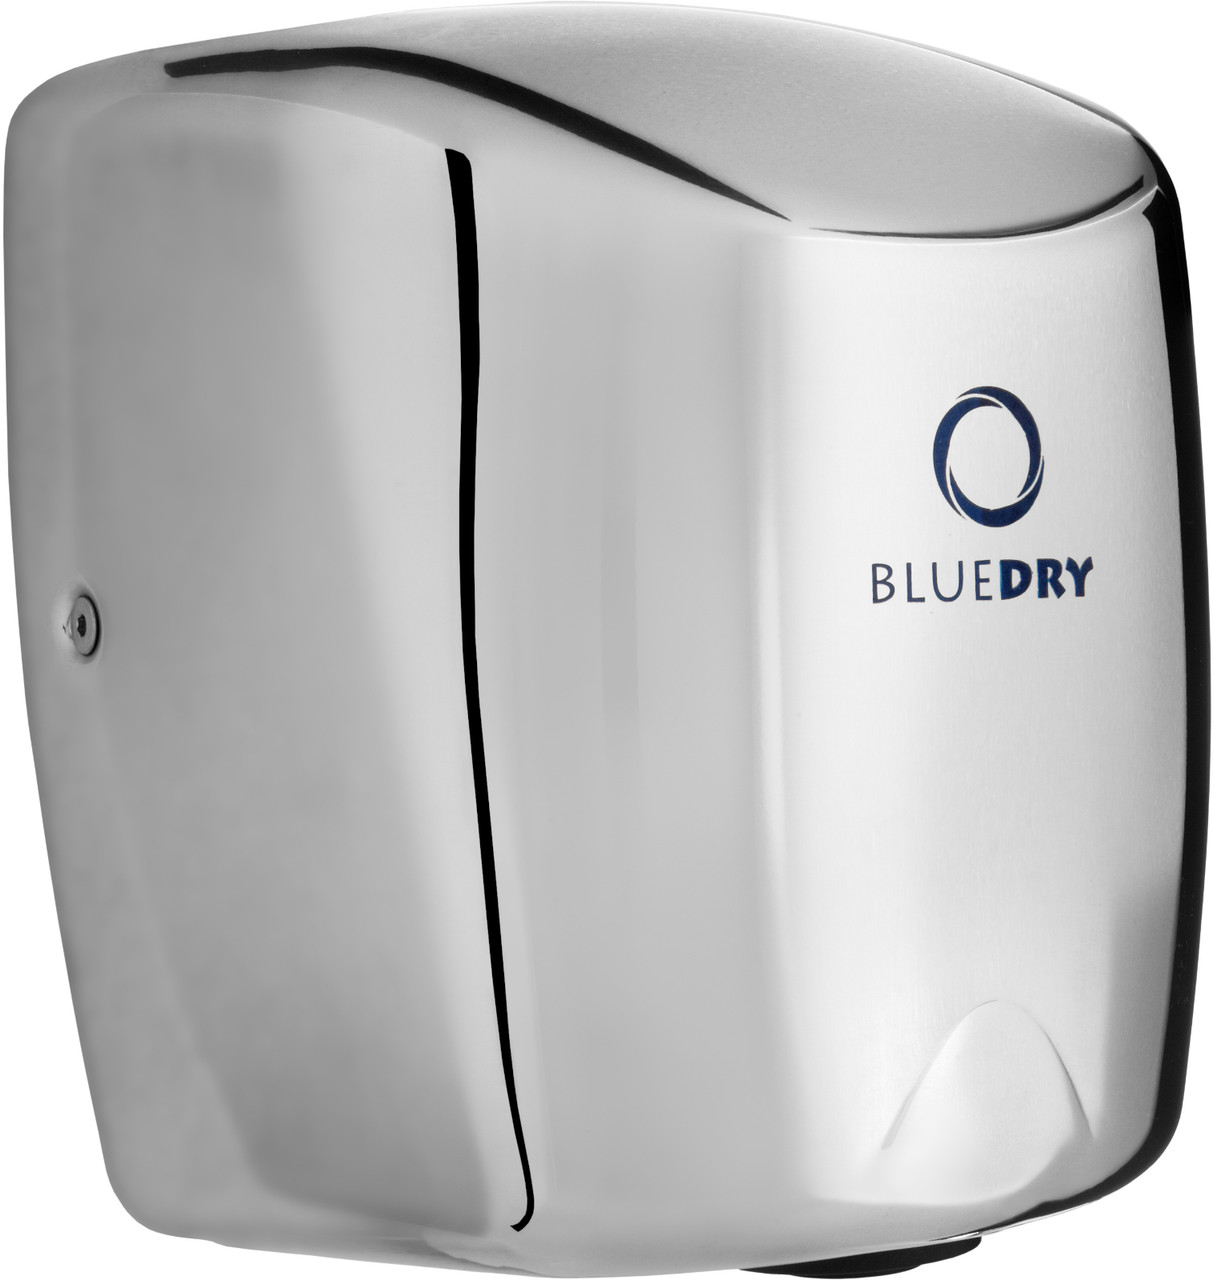 HD-BD1015PS - BlueDry Mini Jet Hand Dryer - Polished Stainless Steel